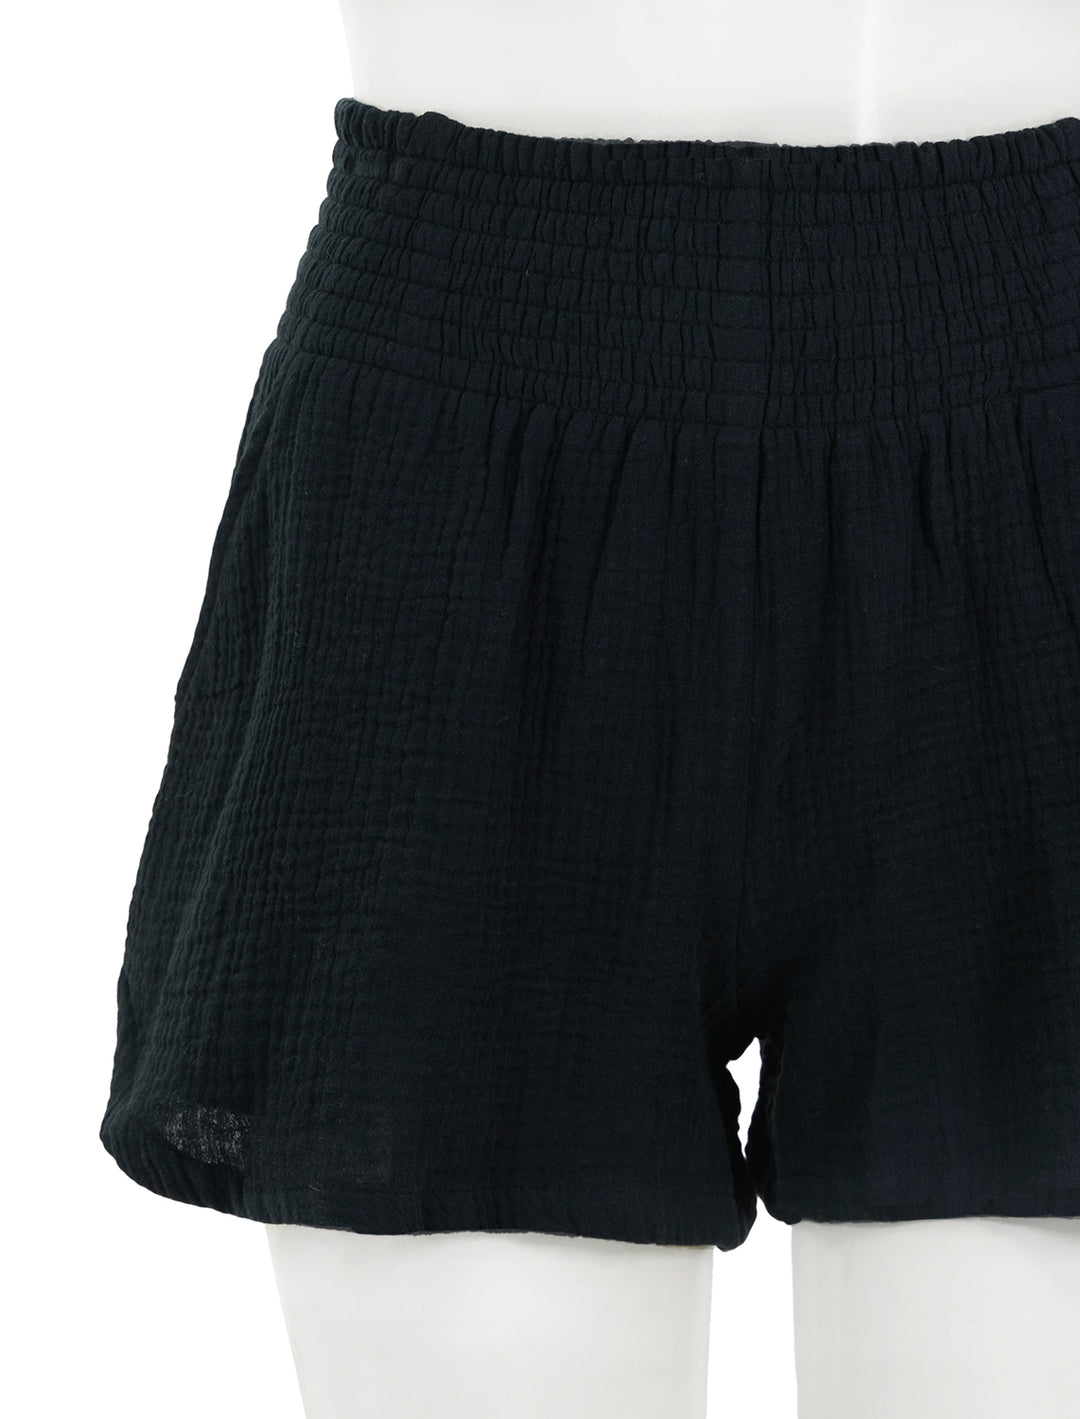 Close-up view of Marine Layer's corine shorts in black.